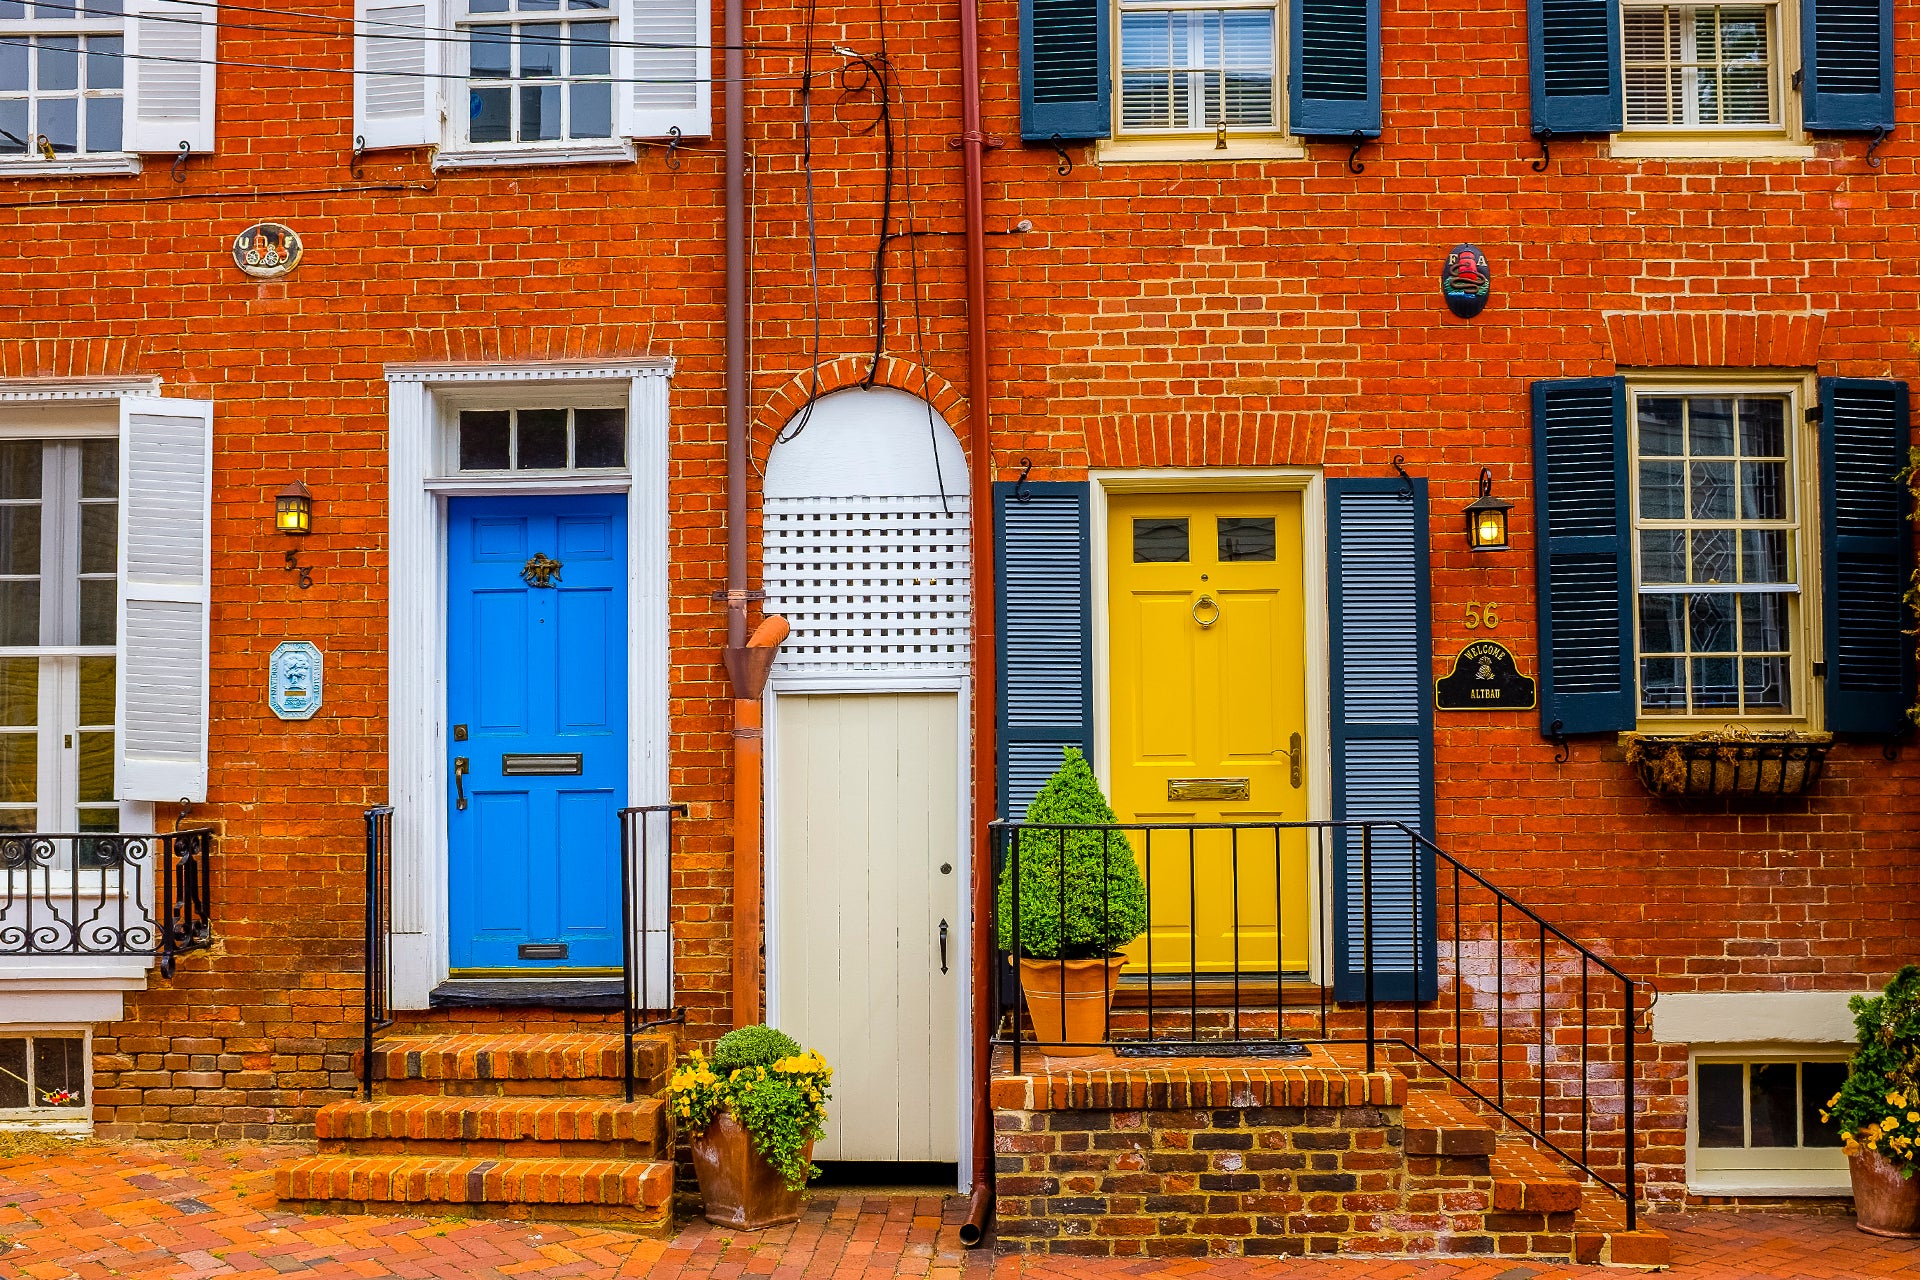 Annapolis buildings with coloured doors and windows